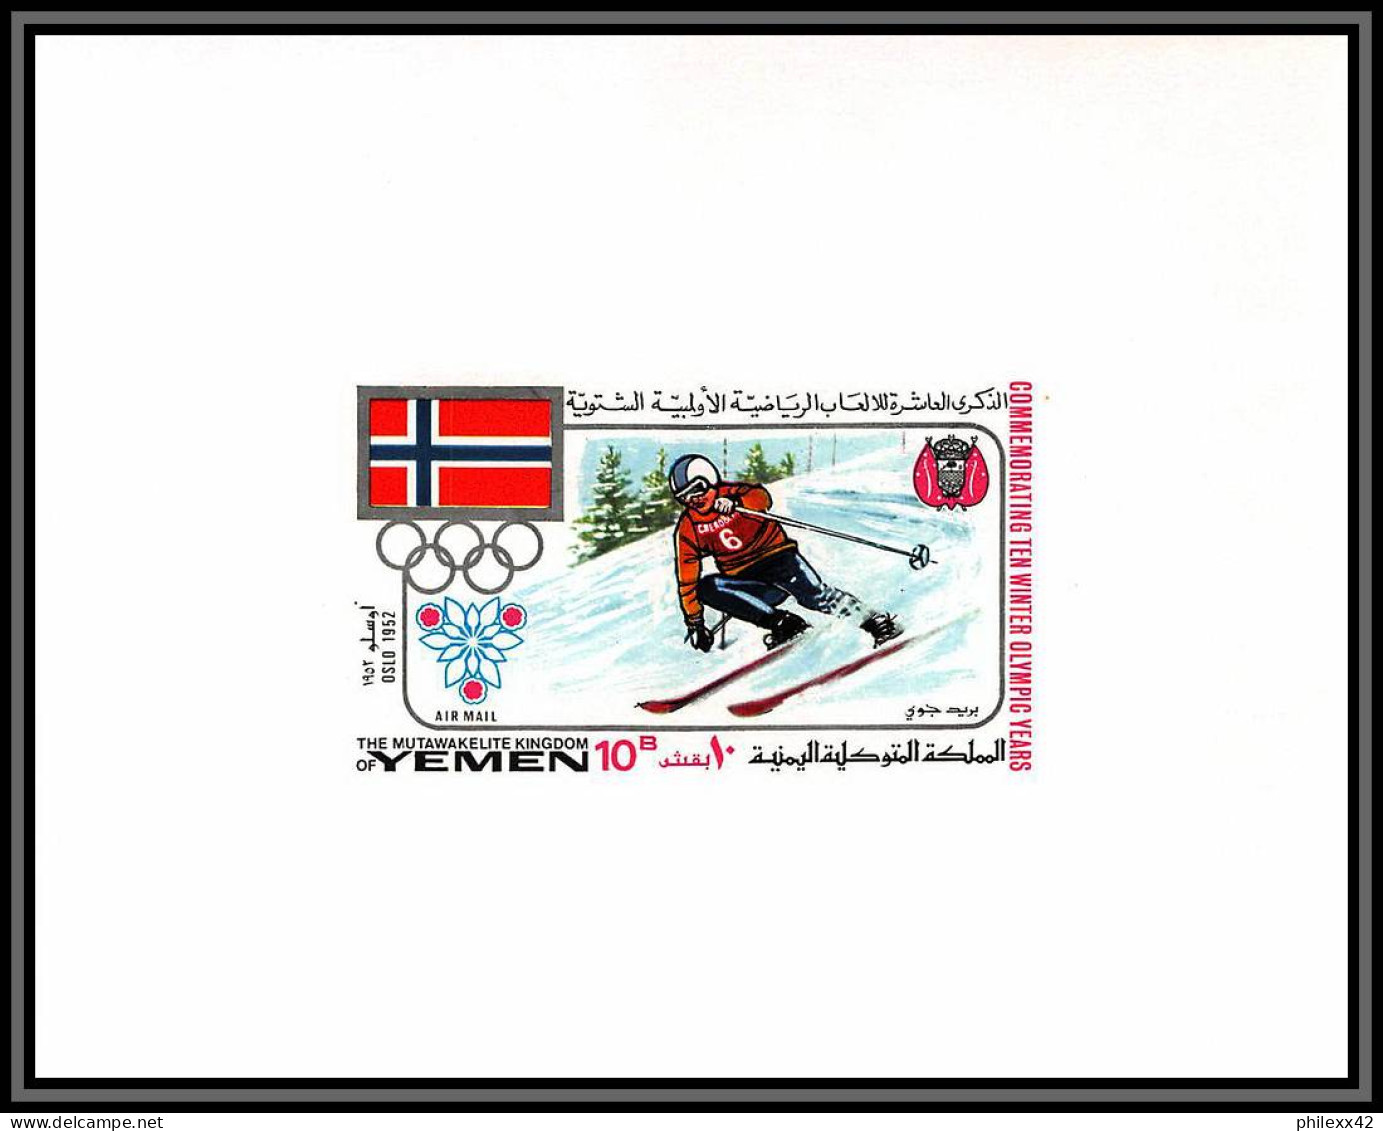 Yemen Royaume (kingdom) - 4290 N°534 Downhill Ski Deluxe Sheets Proof Jeux Olympiques Olympic Game Grenoble 1968 ** MNH - Invierno 1968: Grenoble